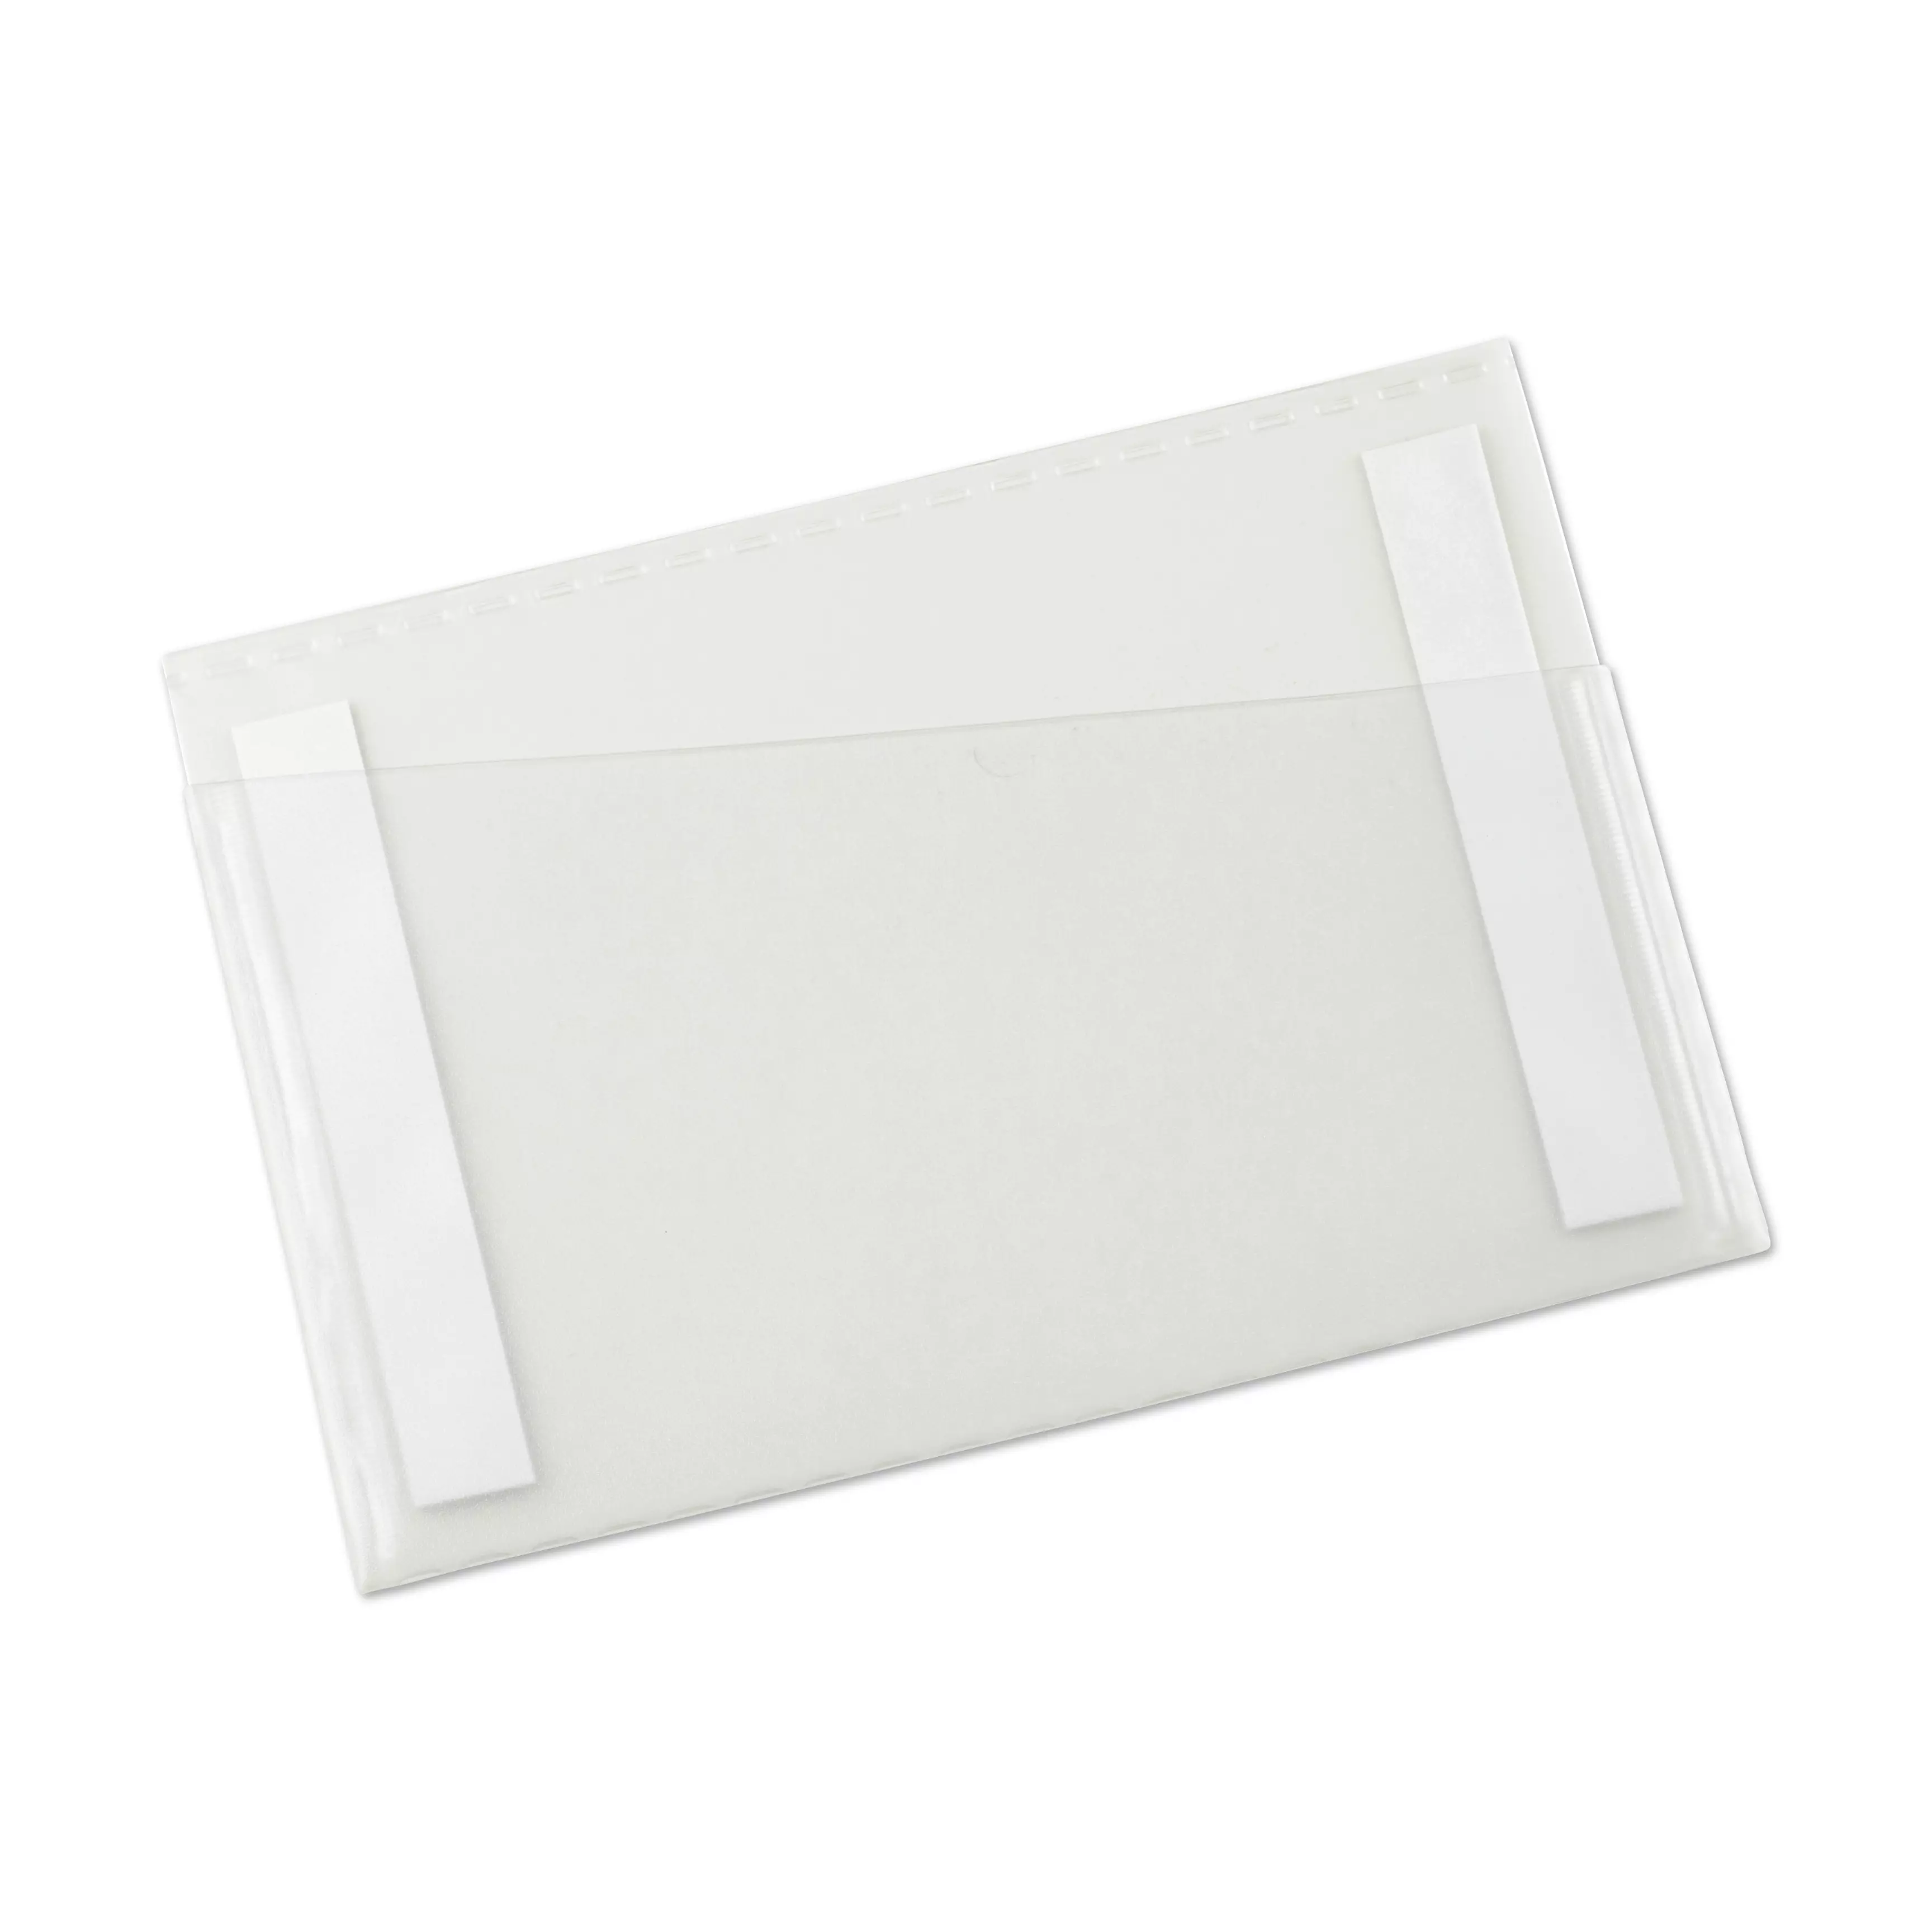 Pocket for documents DIN A5 - Adhesive strips